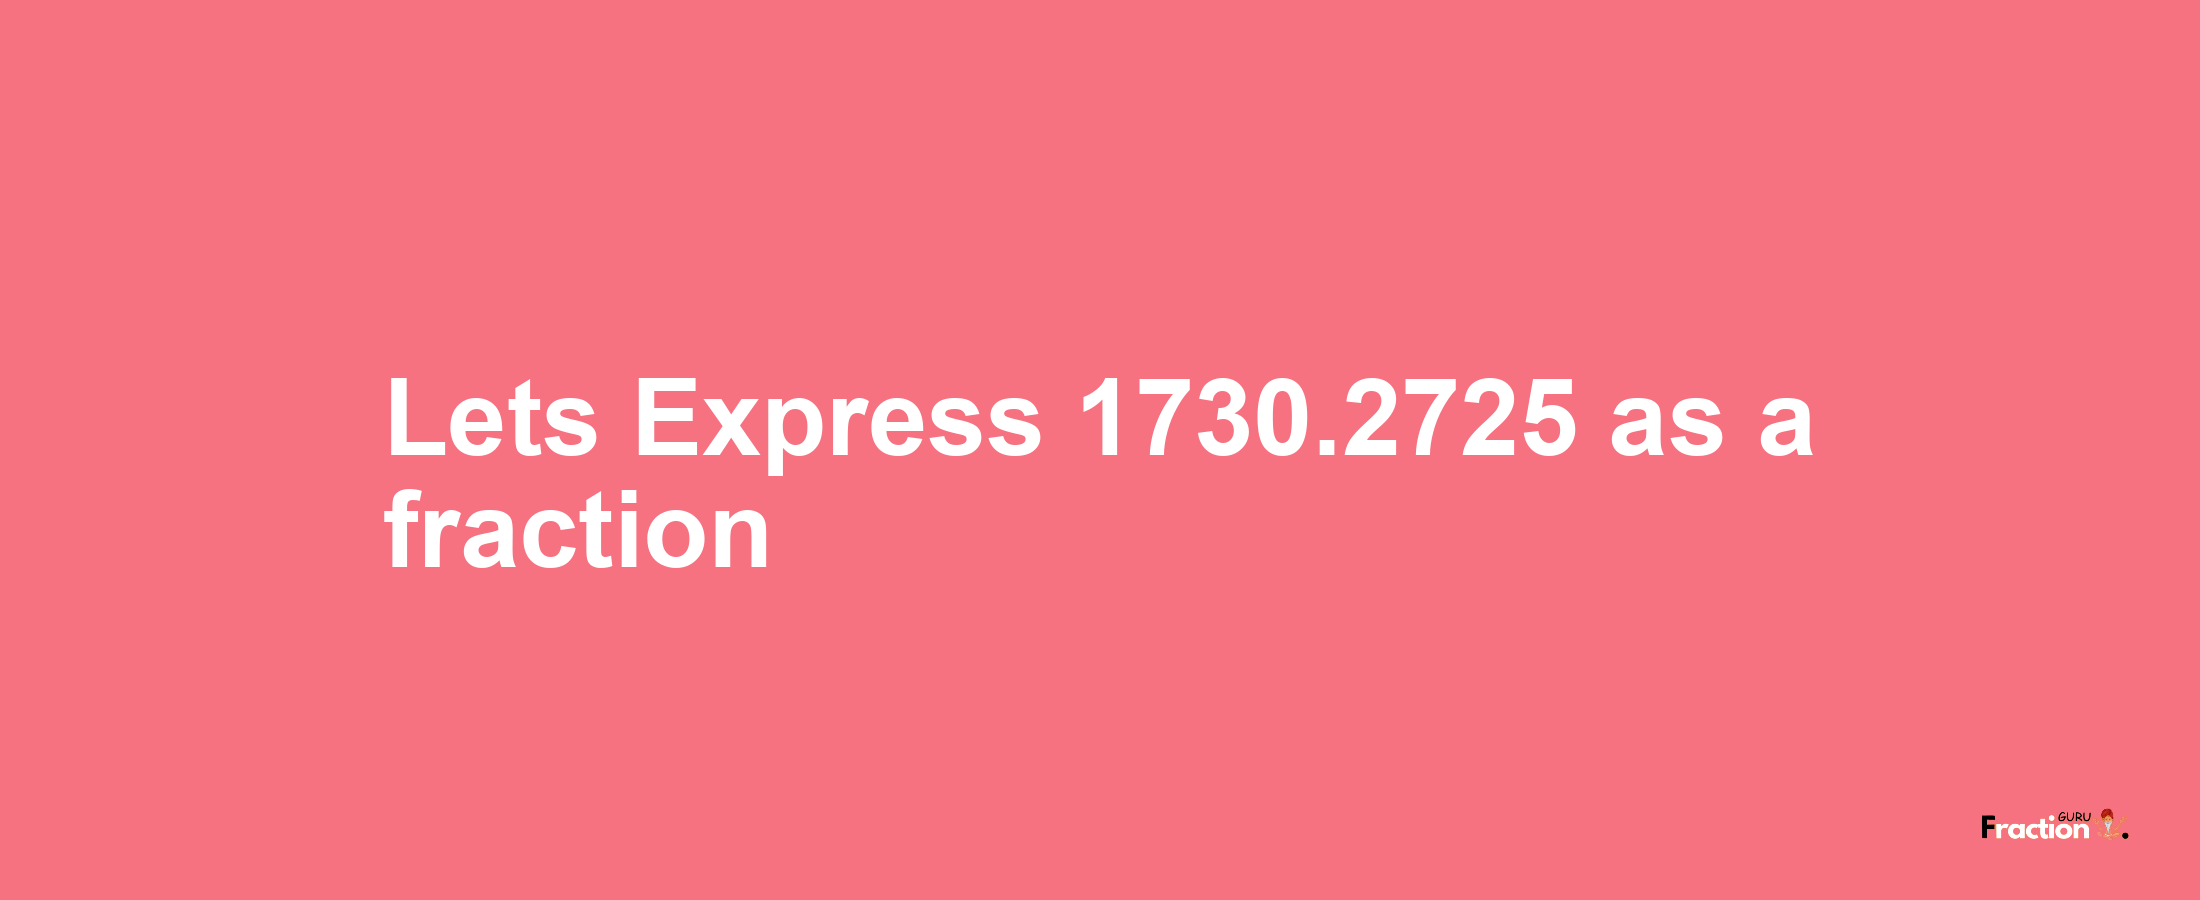 Lets Express 1730.2725 as afraction